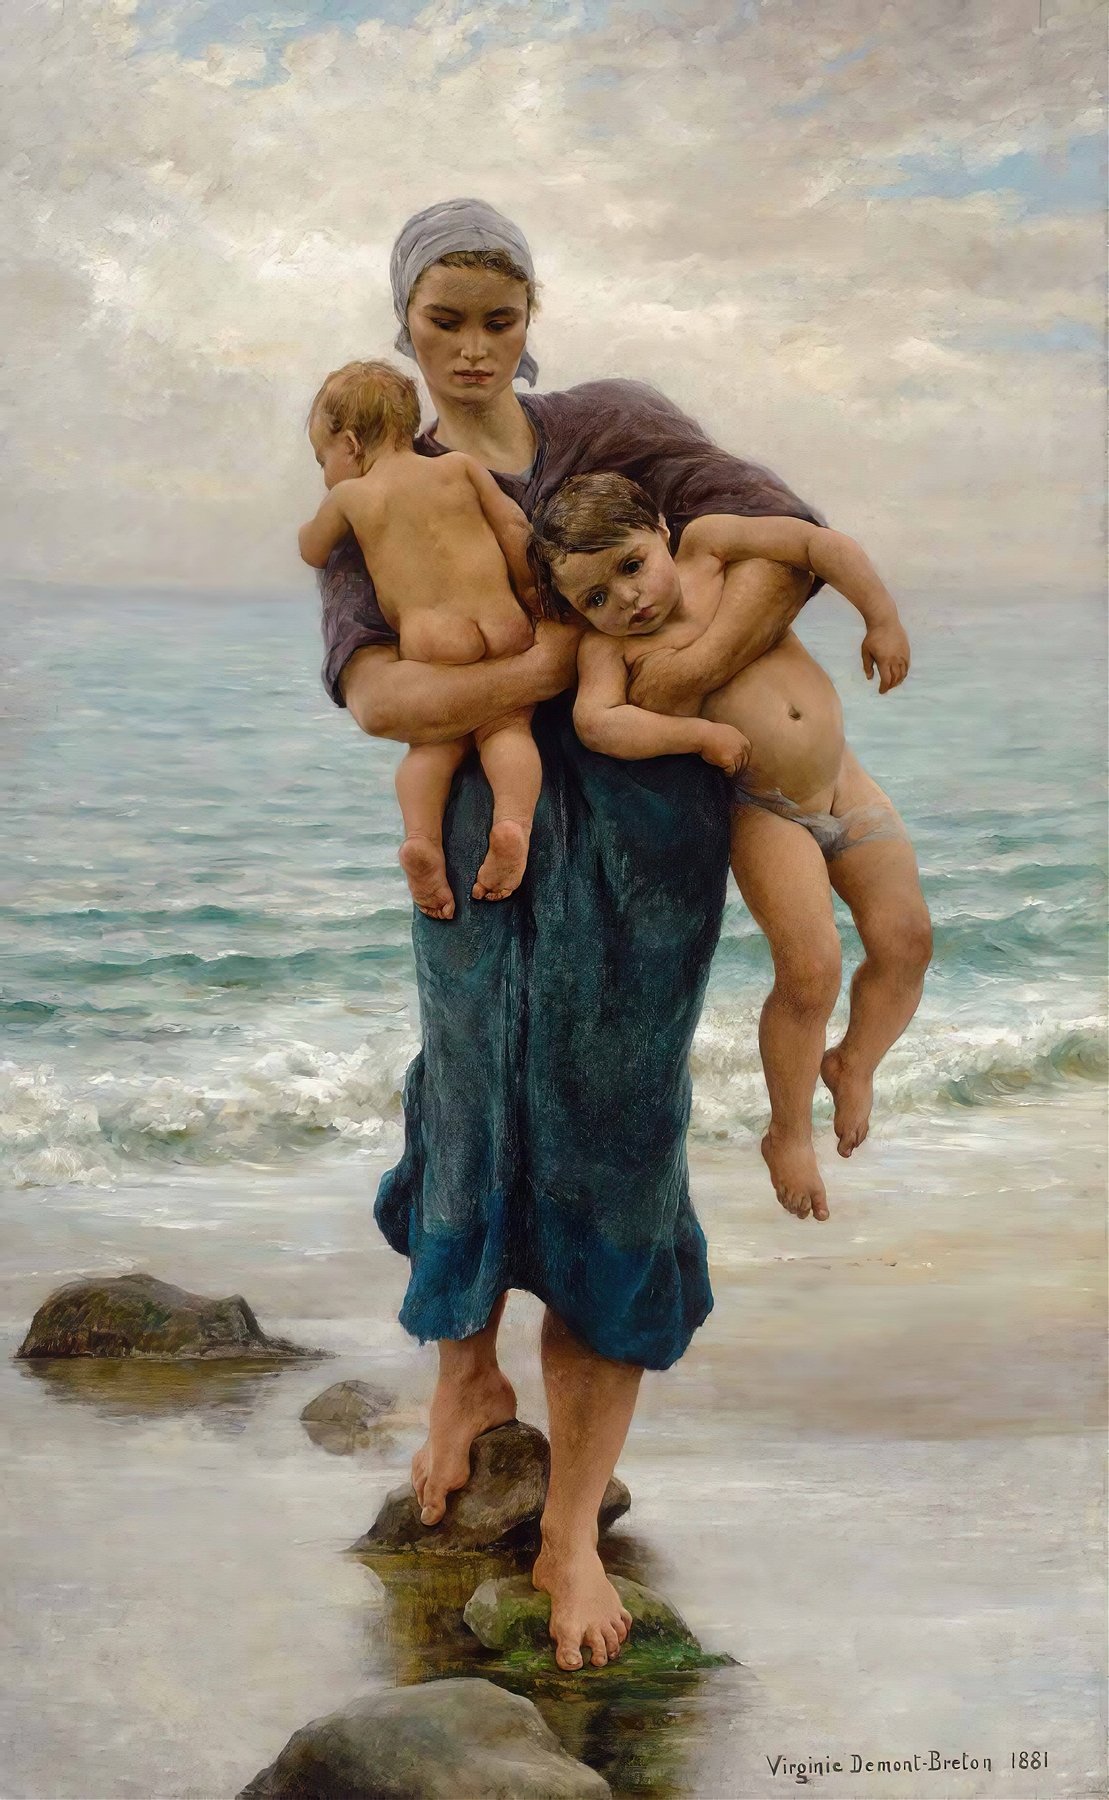 Fisherman’s wife coming to bath her Children (1881)